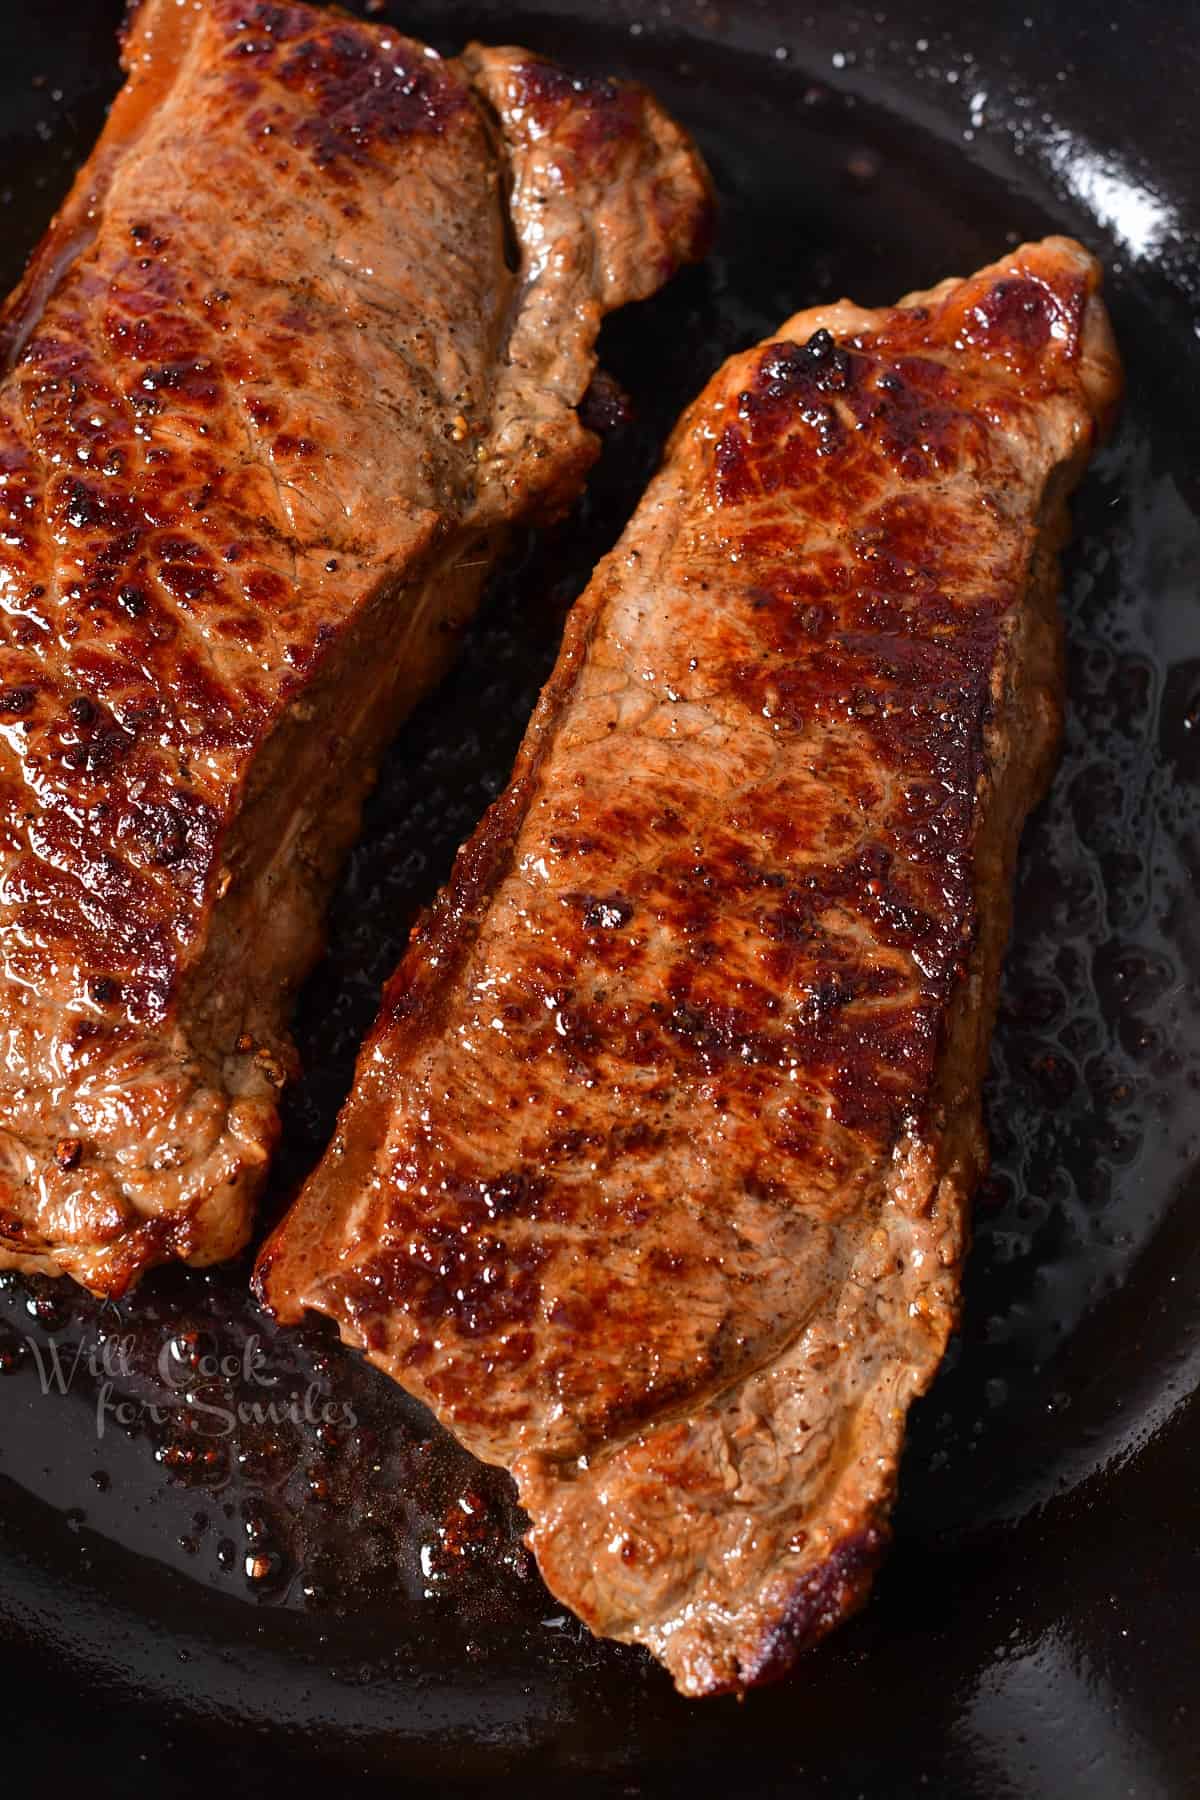 overhead: two new york strips with a brown crust